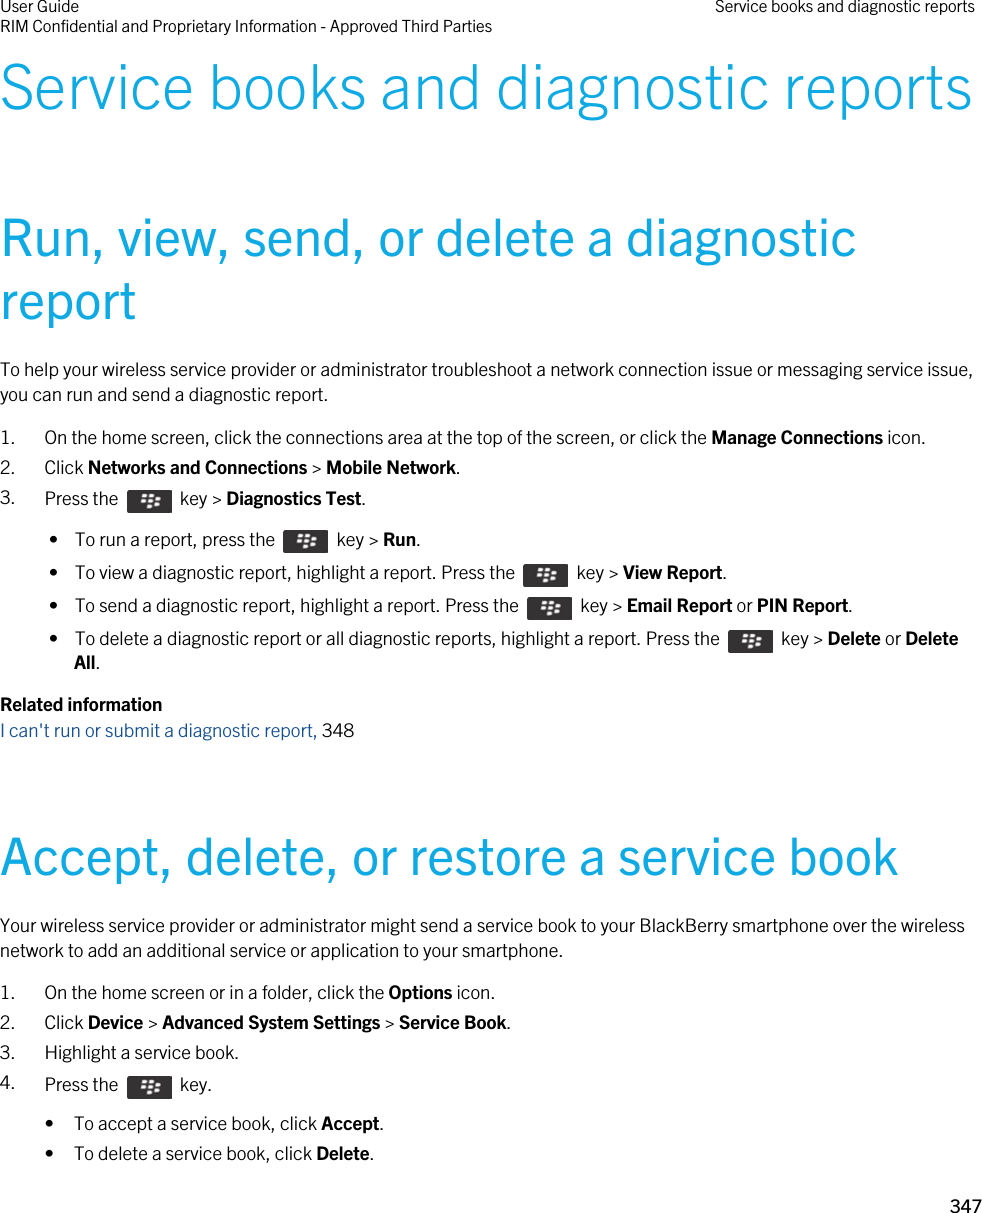 Service books and diagnostic reportsRun, view, send, or delete a diagnostic reportTo help your wireless service provider or administrator troubleshoot a network connection issue or messaging service issue, you can run and send a diagnostic report.1. On the home screen, click the connections area at the top of the screen, or click the Manage Connections icon.2. Click Networks and Connections &gt; Mobile Network.3. Press the    key &gt; Diagnostics Test.  •  To run a report, press the    key &gt; Run. •  To view a diagnostic report, highlight a report. Press the    key &gt; View Report. •  To send a diagnostic report, highlight a report. Press the    key &gt; Email Report or PIN Report. •  To delete a diagnostic report or all diagnostic reports, highlight a report. Press the    key &gt; Delete or Delete All.Related informationI can&apos;t run or submit a diagnostic report, 348Accept, delete, or restore a service bookYour wireless service provider or administrator might send a service book to your BlackBerry smartphone over the wireless network to add an additional service or application to your smartphone.1. On the home screen or in a folder, click the Options icon.2. Click Device &gt; Advanced System Settings &gt; Service Book.3. Highlight a service book.4. Press the    key. • To accept a service book, click Accept.• To delete a service book, click Delete.User GuideRIM Confidential and Proprietary Information - Approved Third Parties Service books and diagnostic reports347 